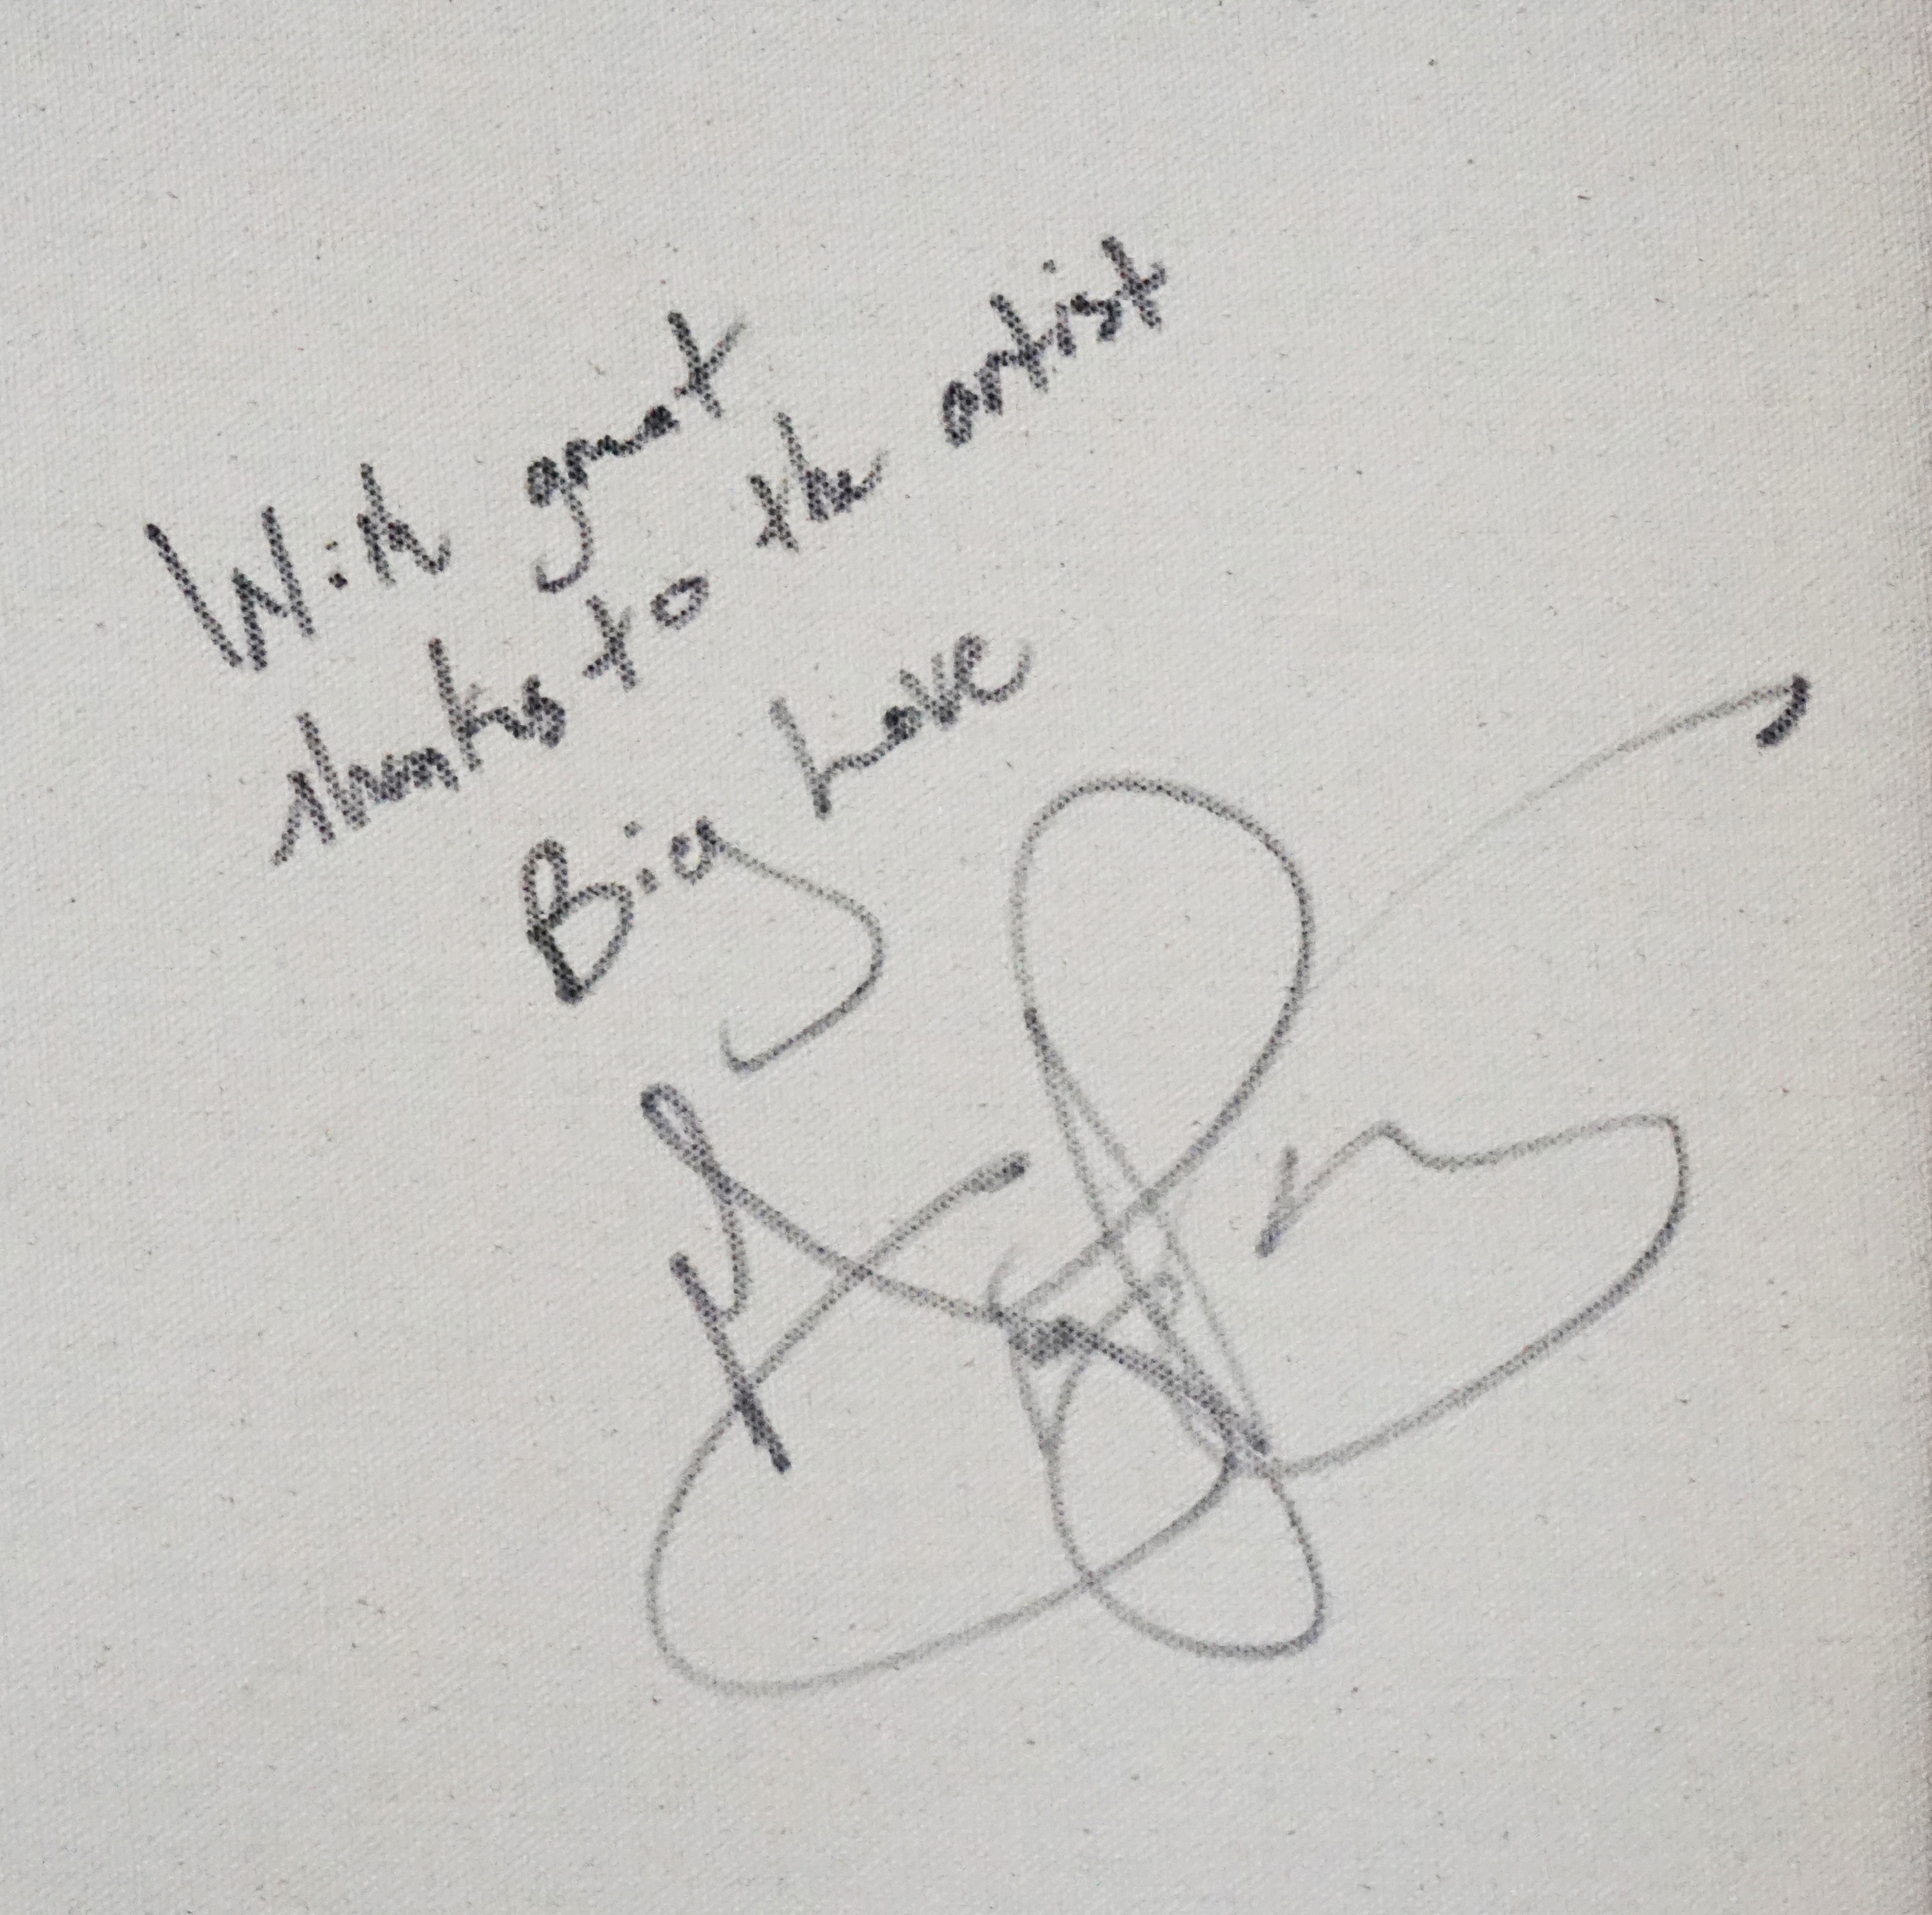 Reverse of Portrait signed by Gregory Porter